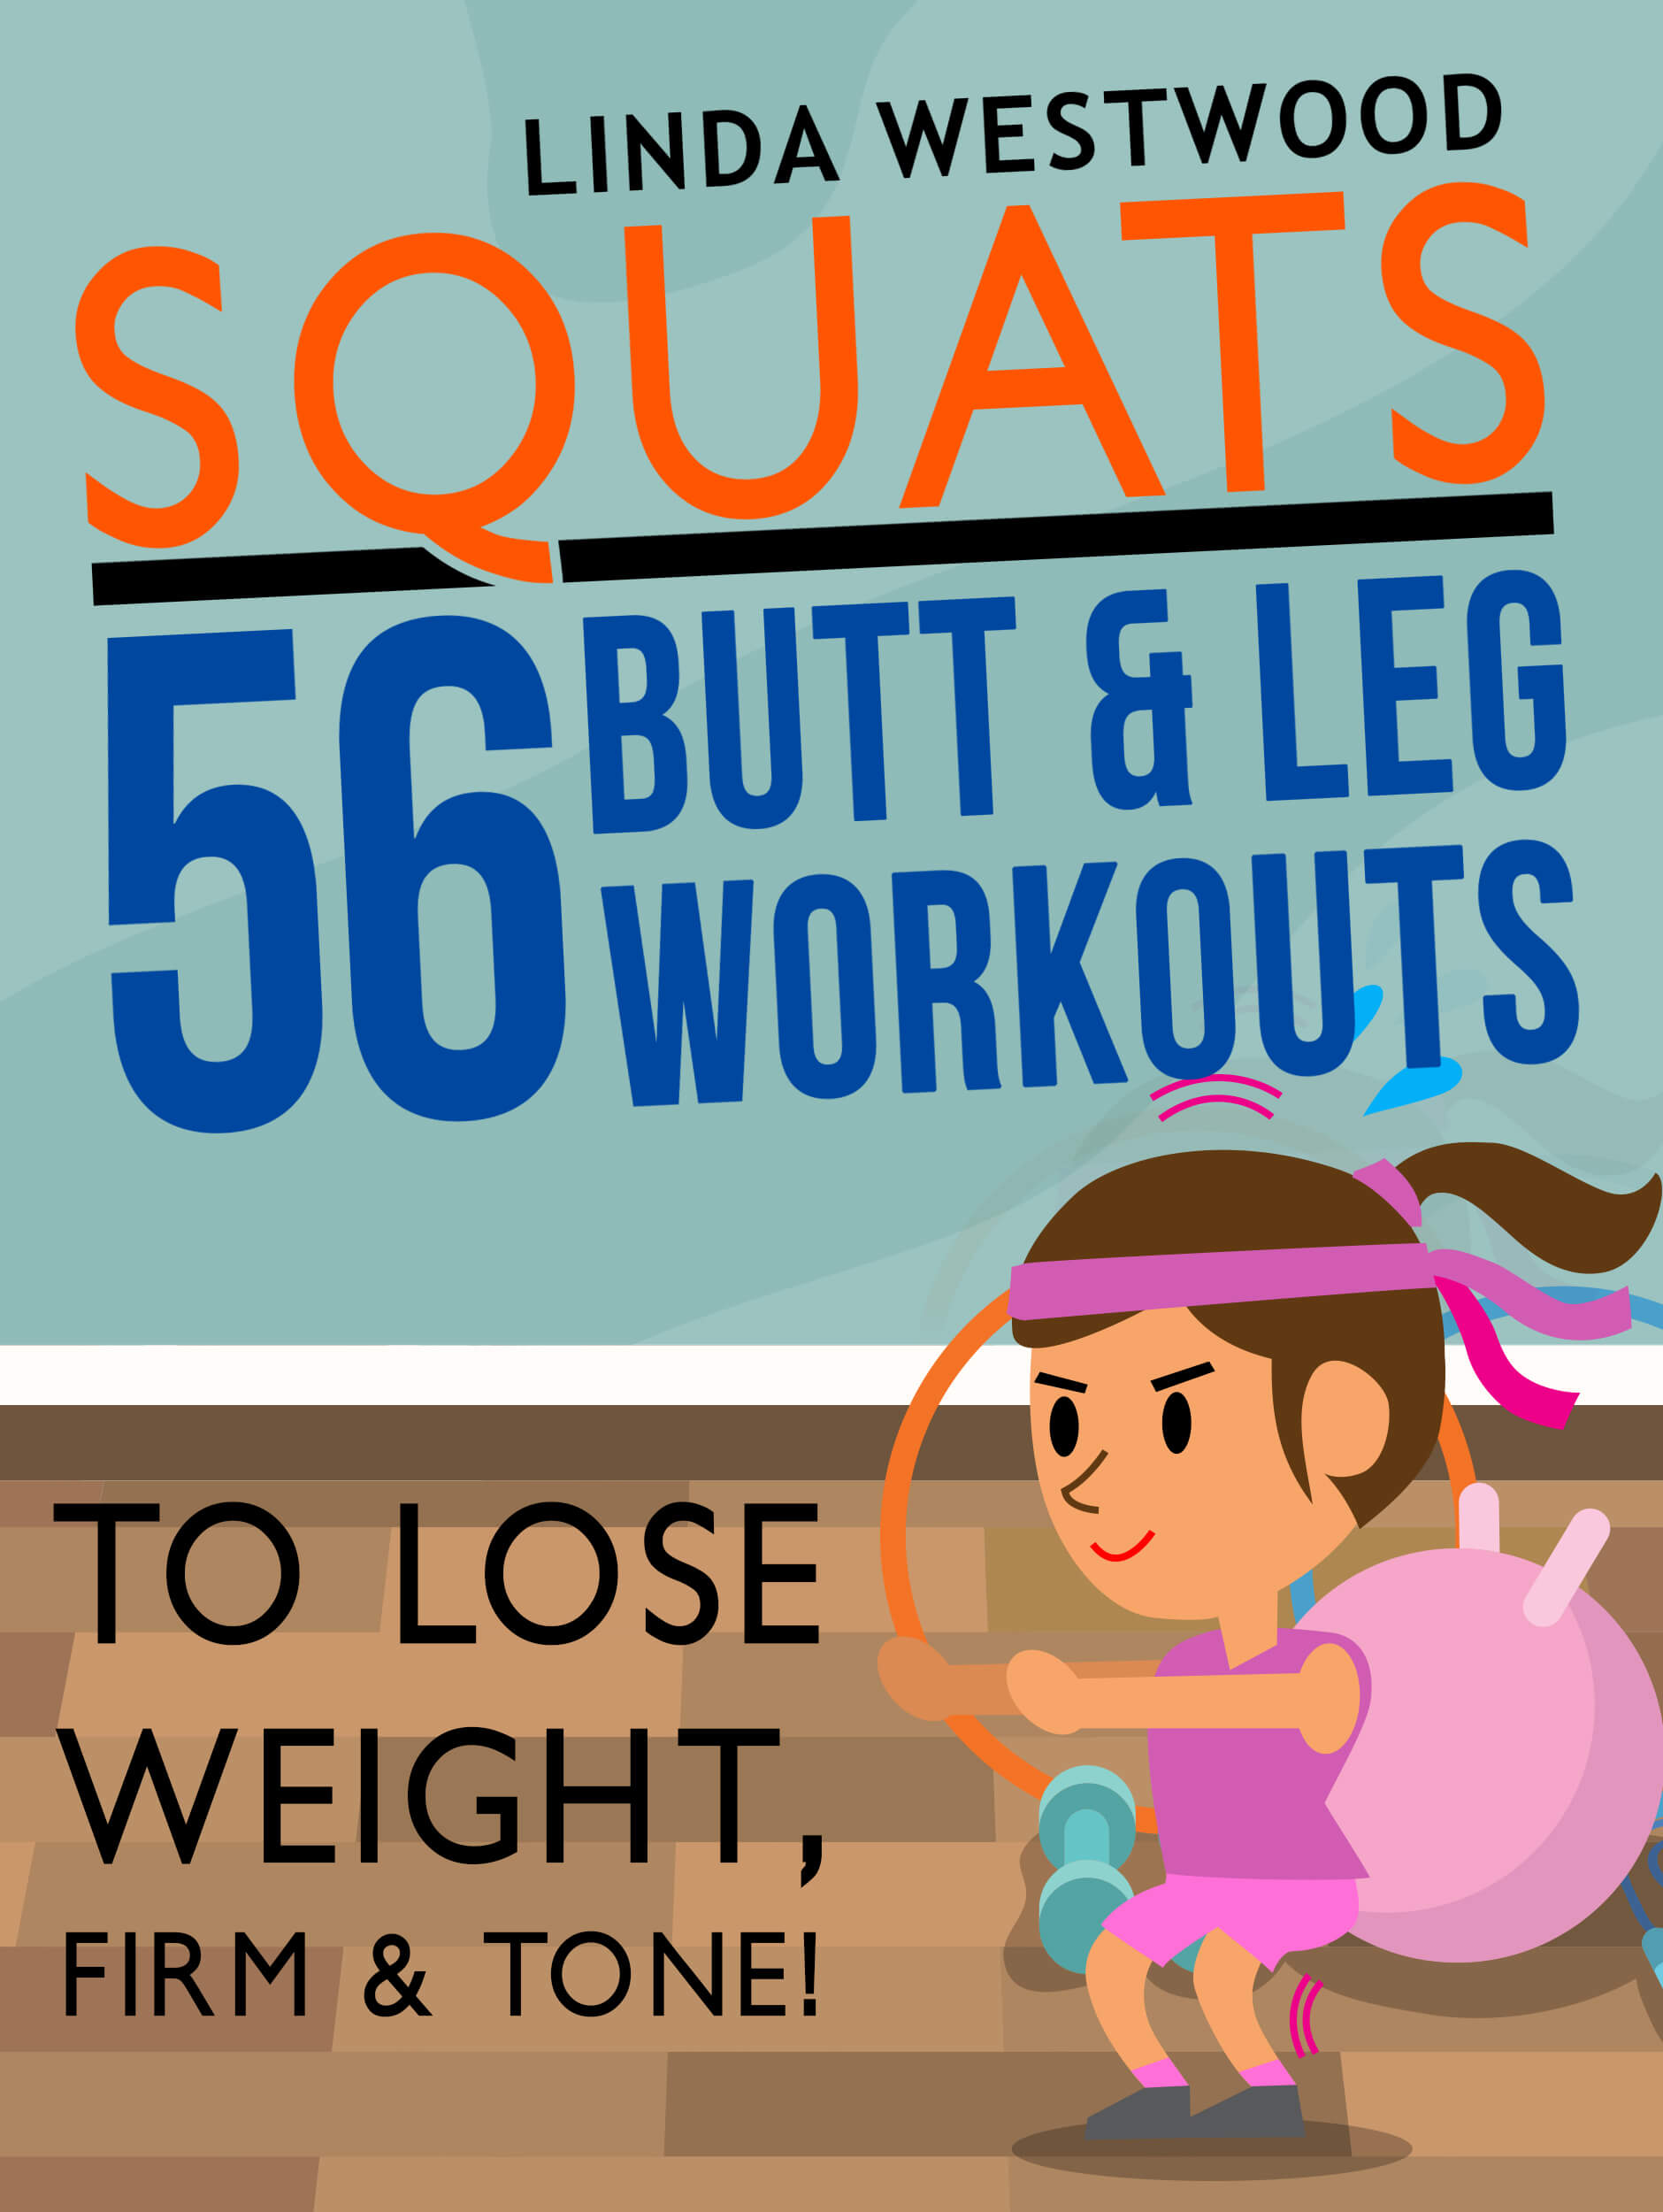 FREE: Squats (3rd Edition): 56 Butt & Leg Workouts To Lose Weight, Firm & Tone! by Linda Westwood